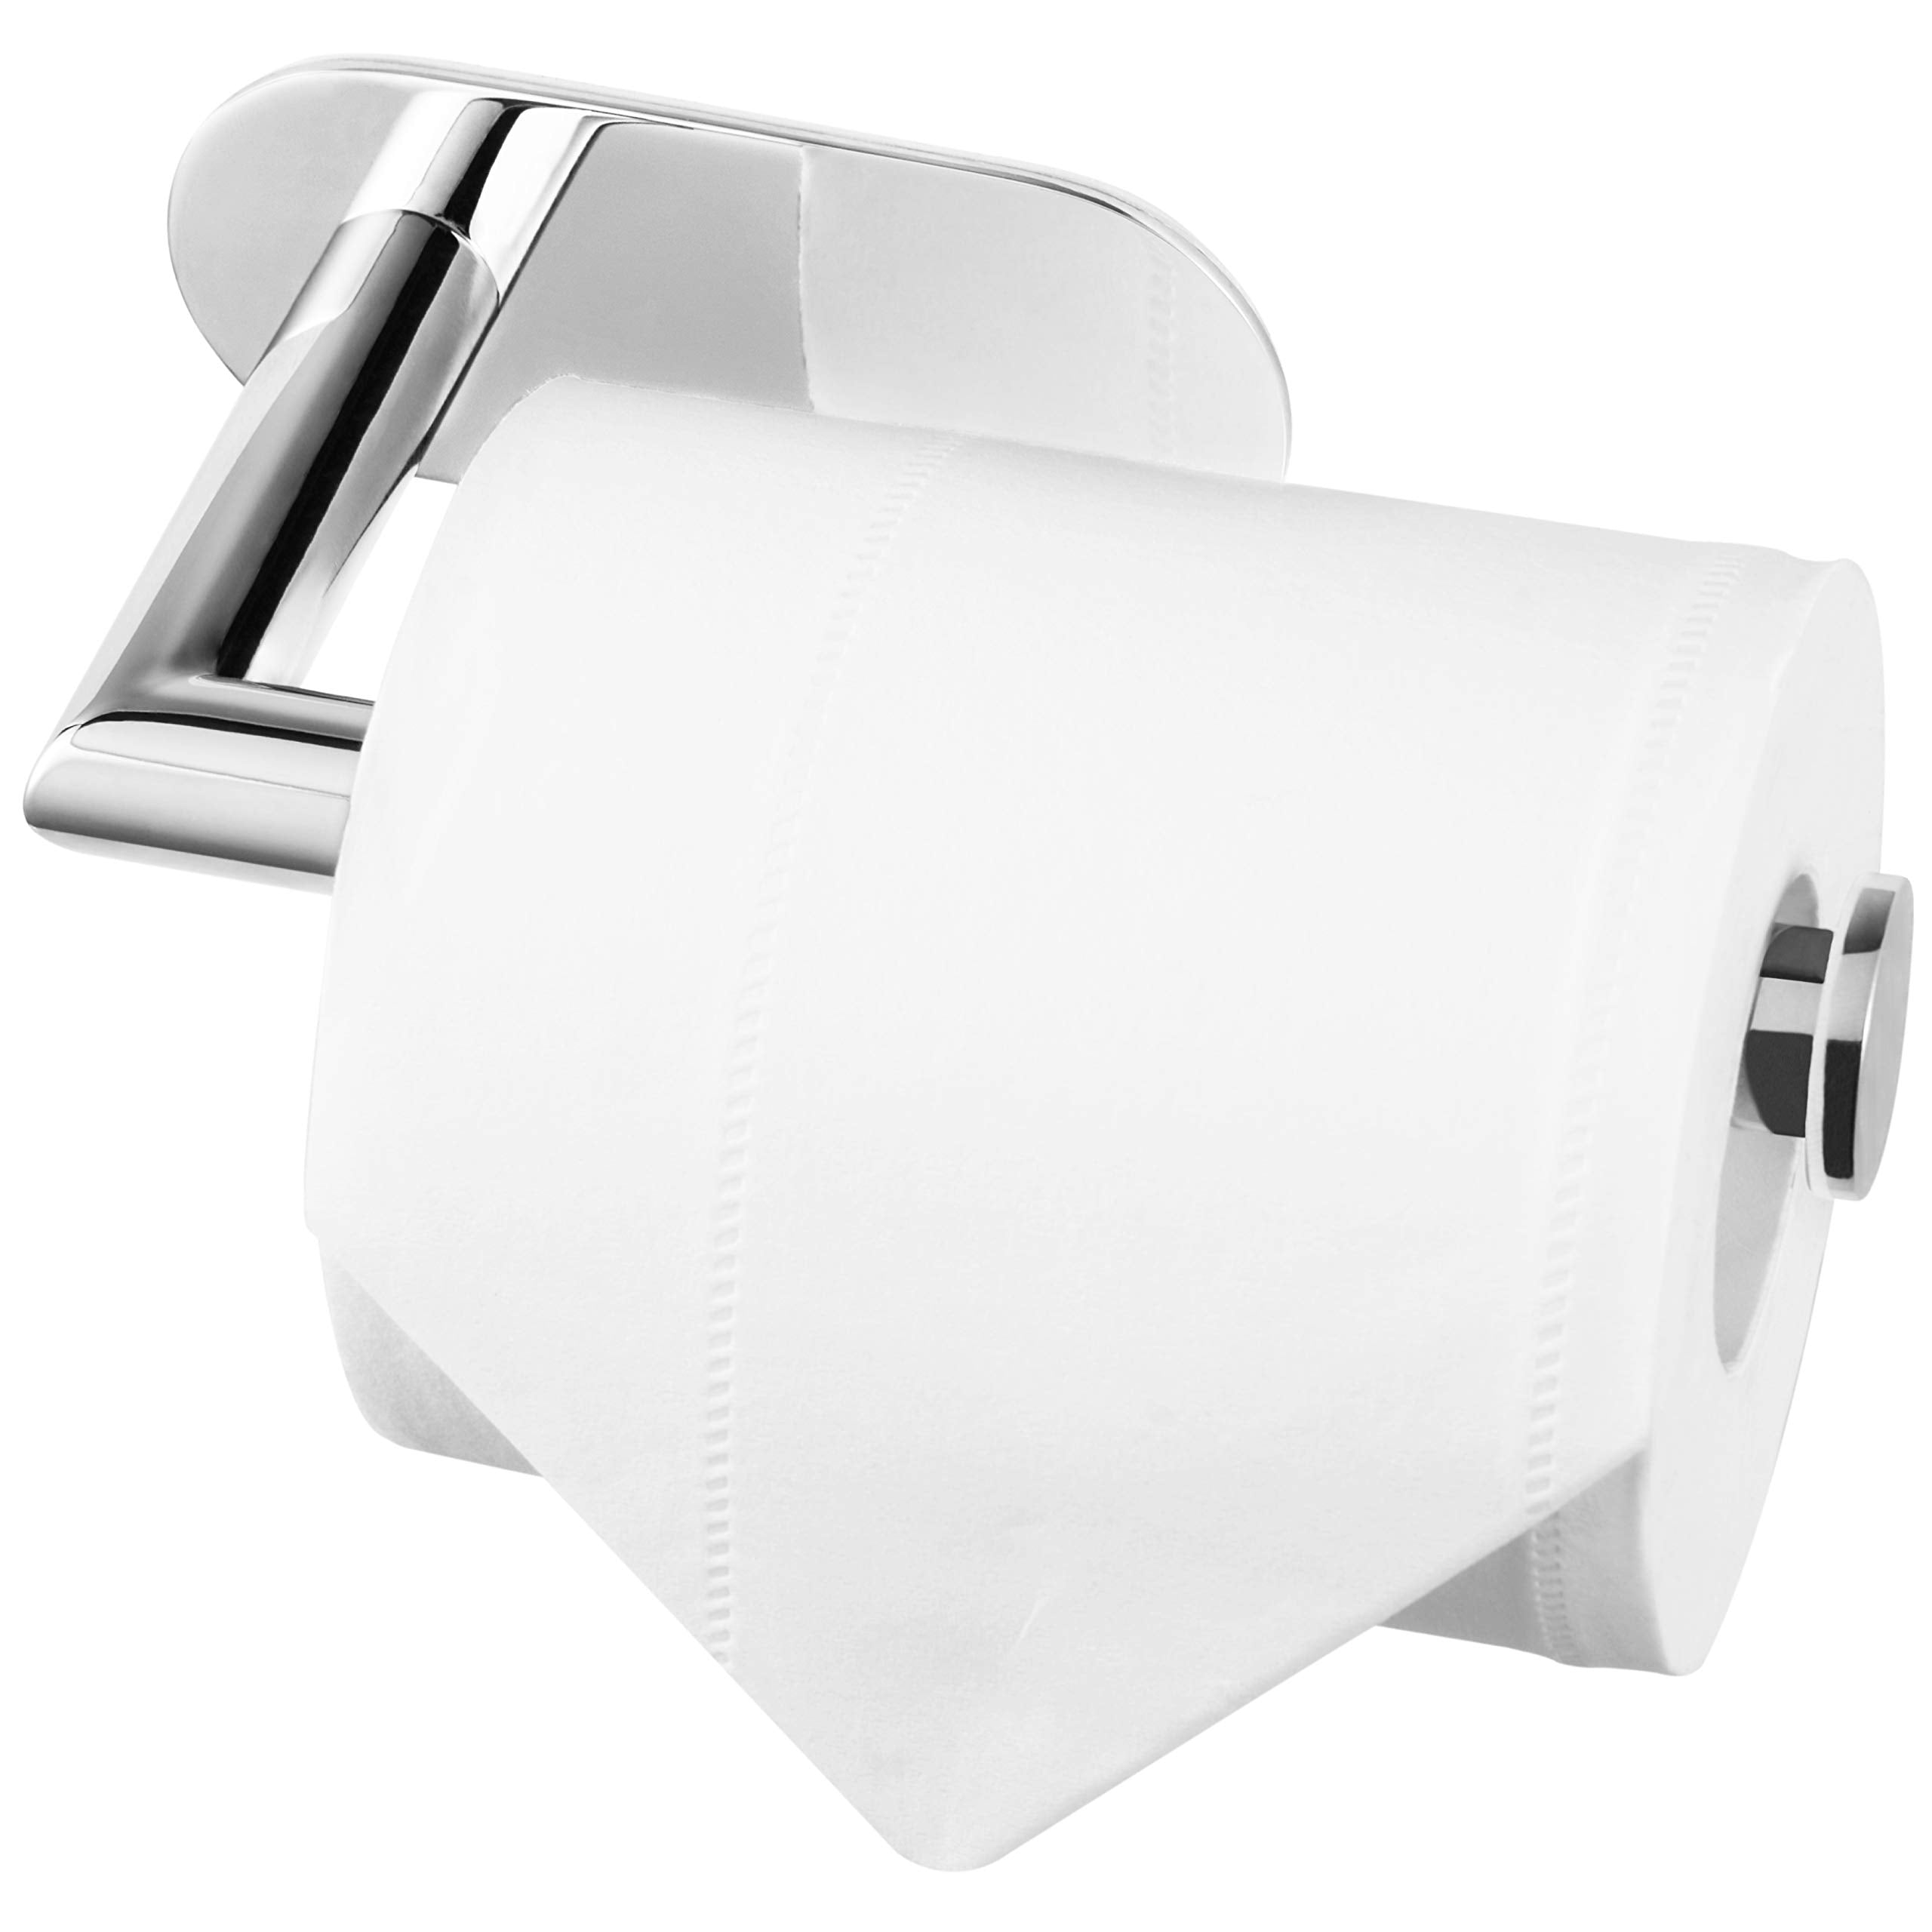 toilet-paper-holder-adhesive-stainless-steel-self-adhesive-toilet-paper-roll-holde-bathroom-polished-chrome